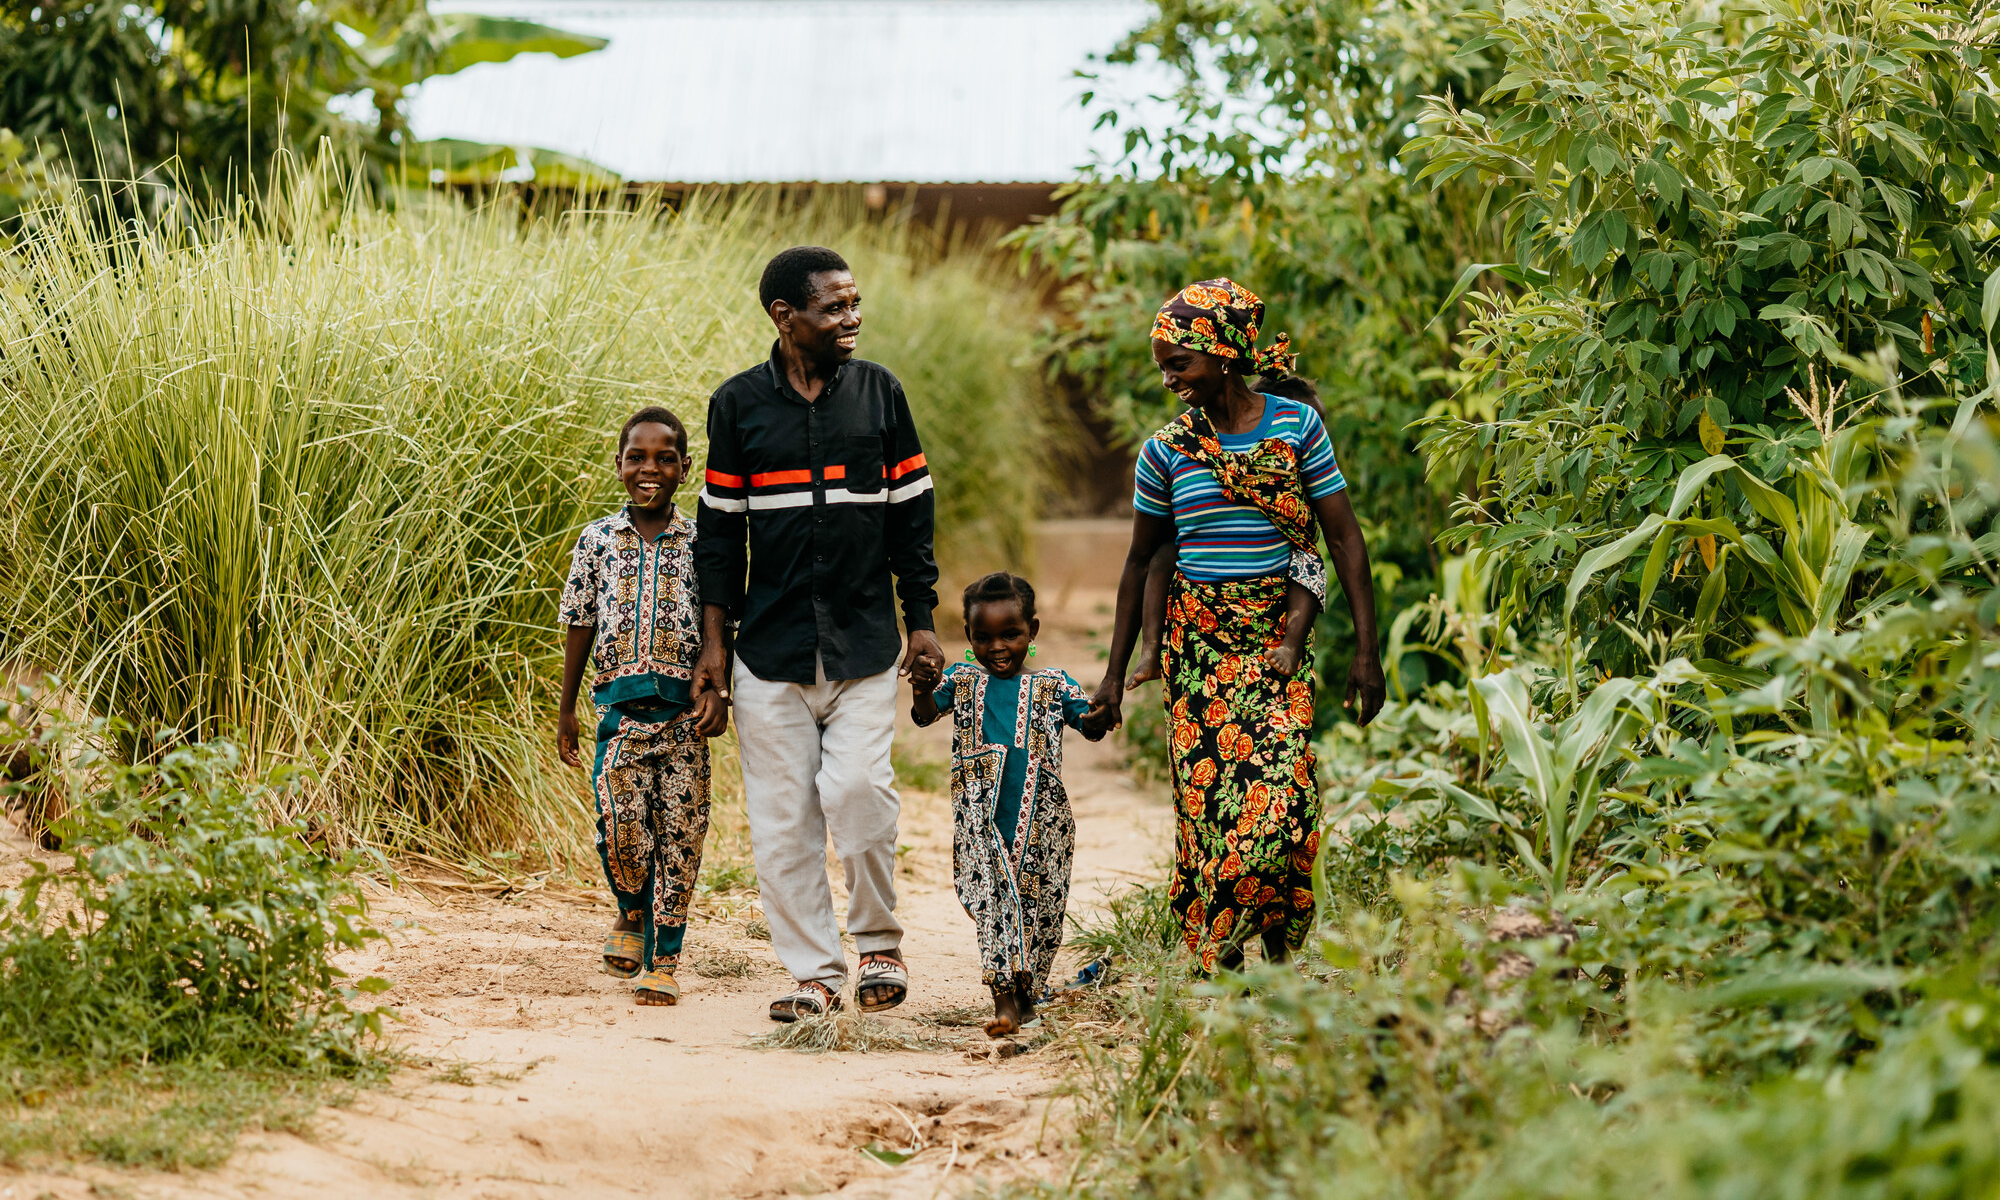 A smiling family holding hands walk down a dirt path through foliage.